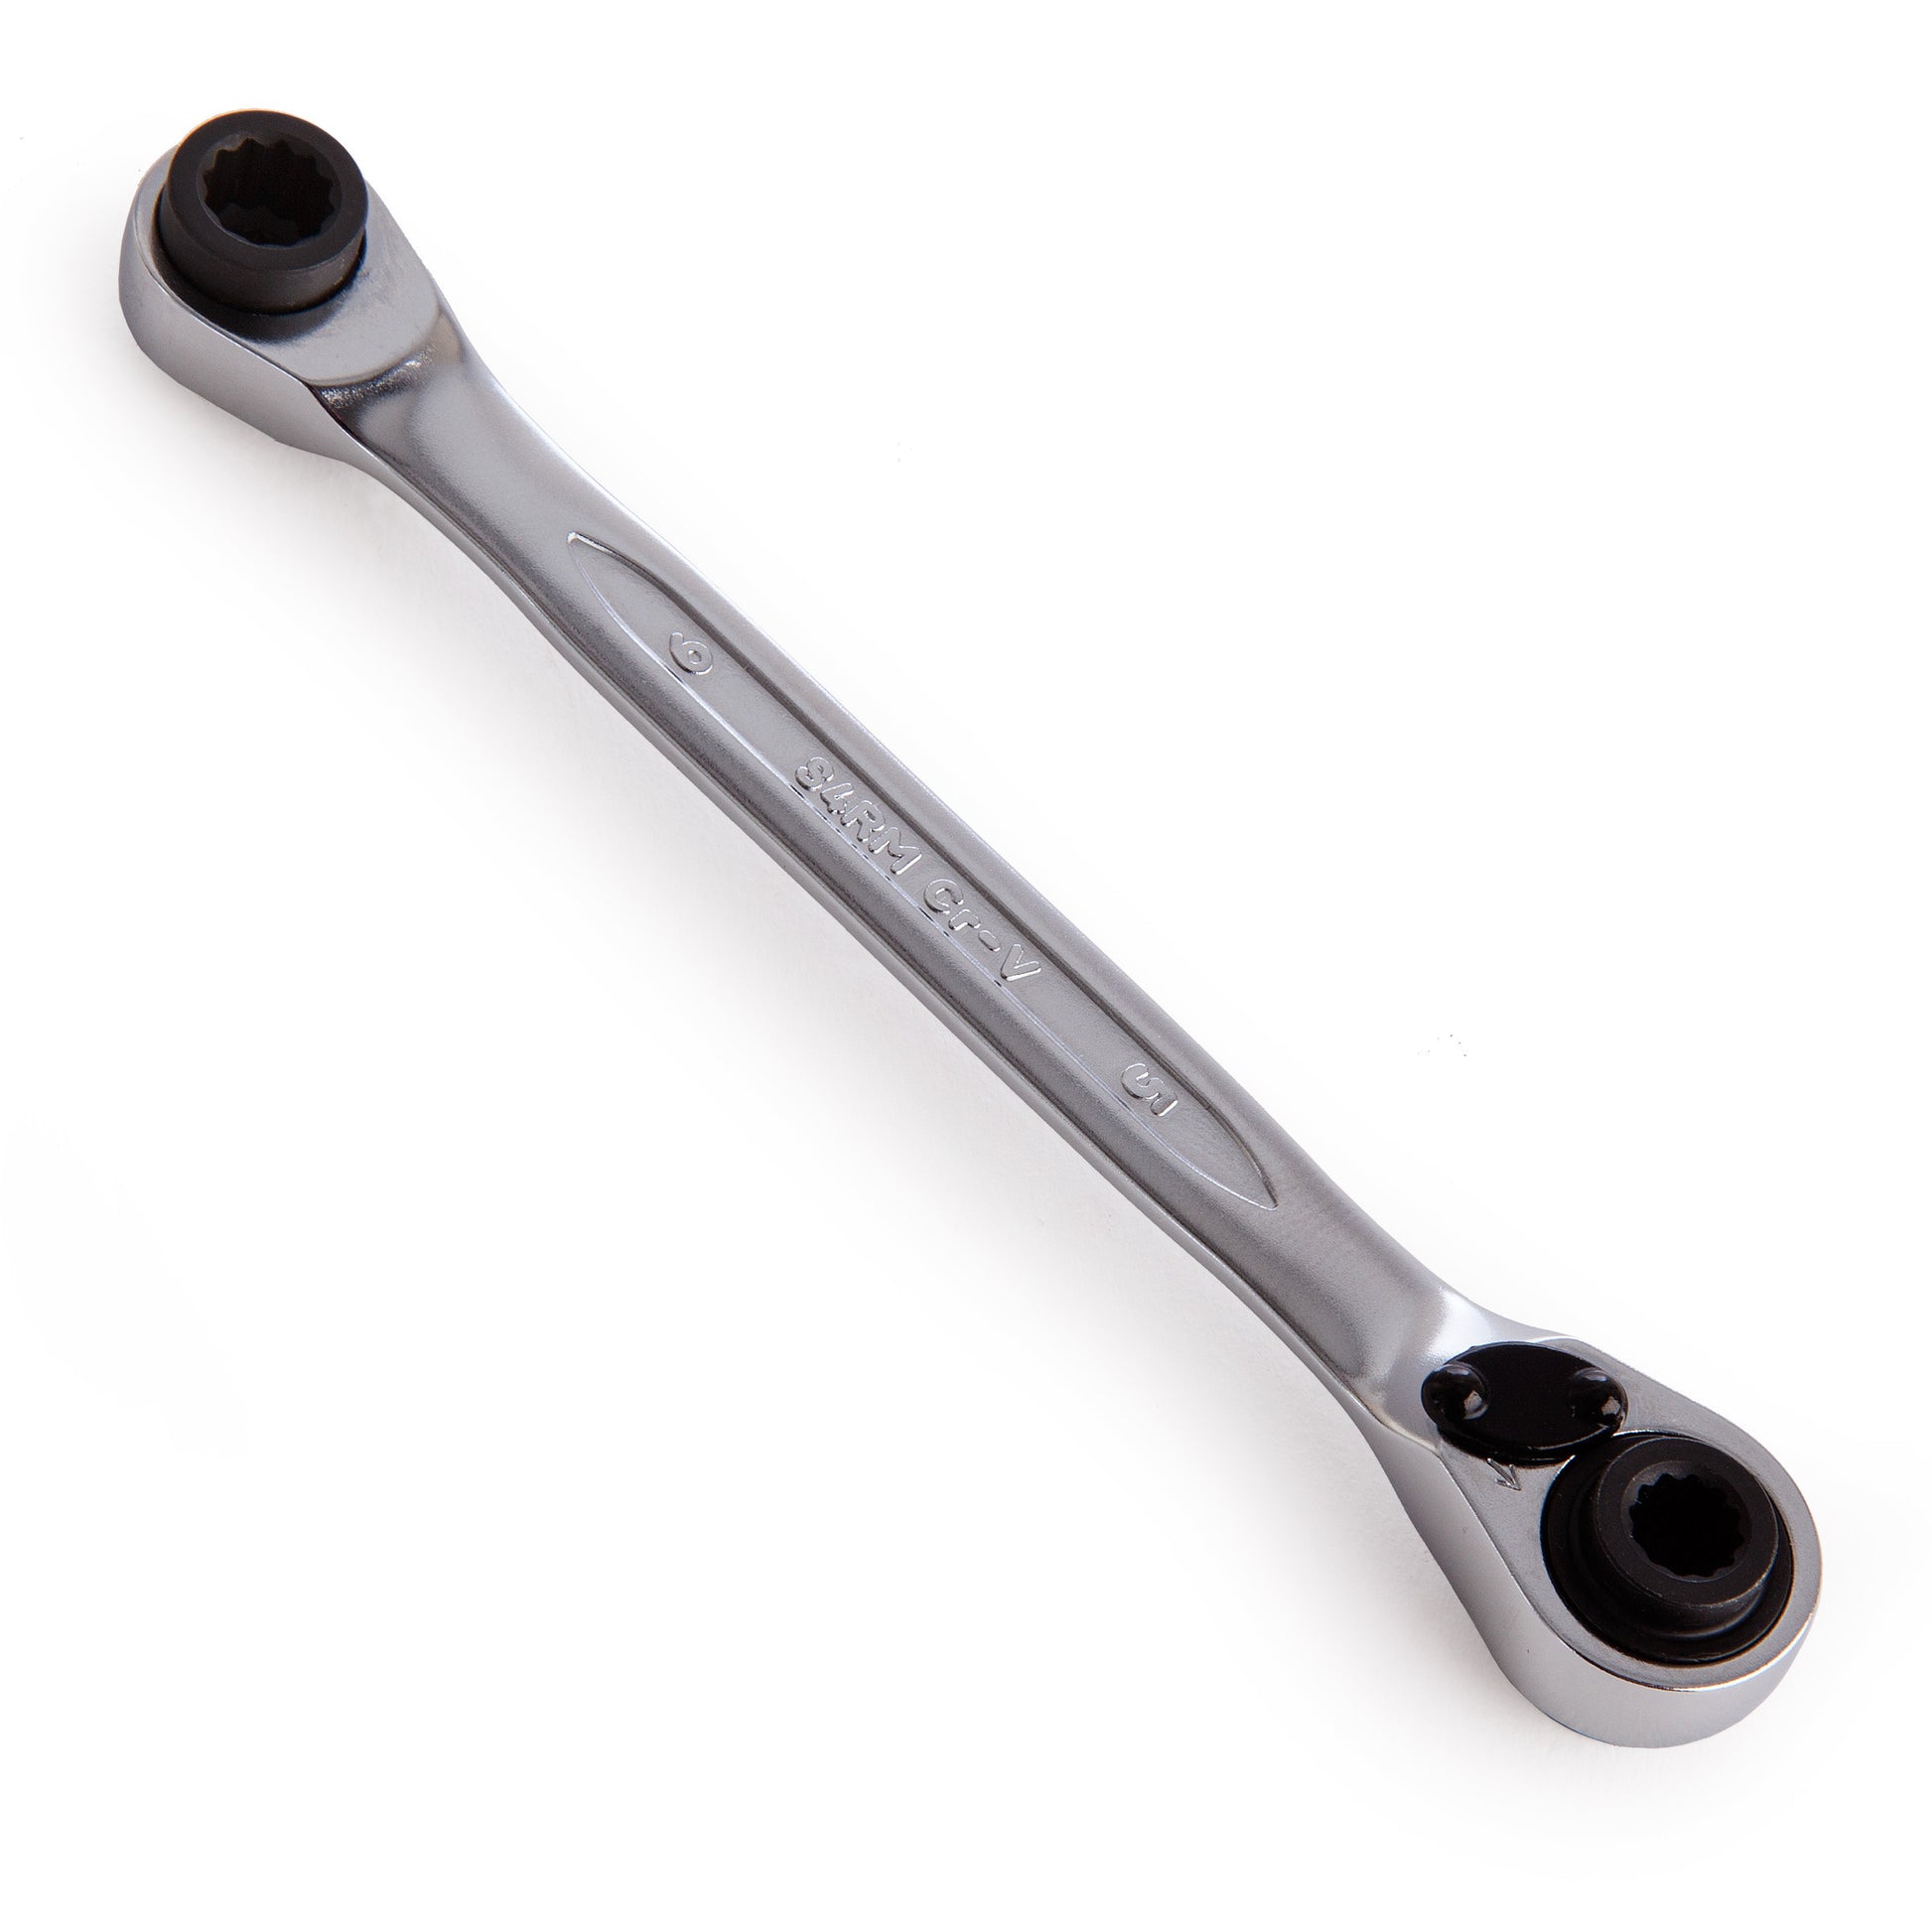 Bahco Spanner Reversible Ratchet Metric Sizes Include 16, 17, 18, 19mm S4RM-16-19